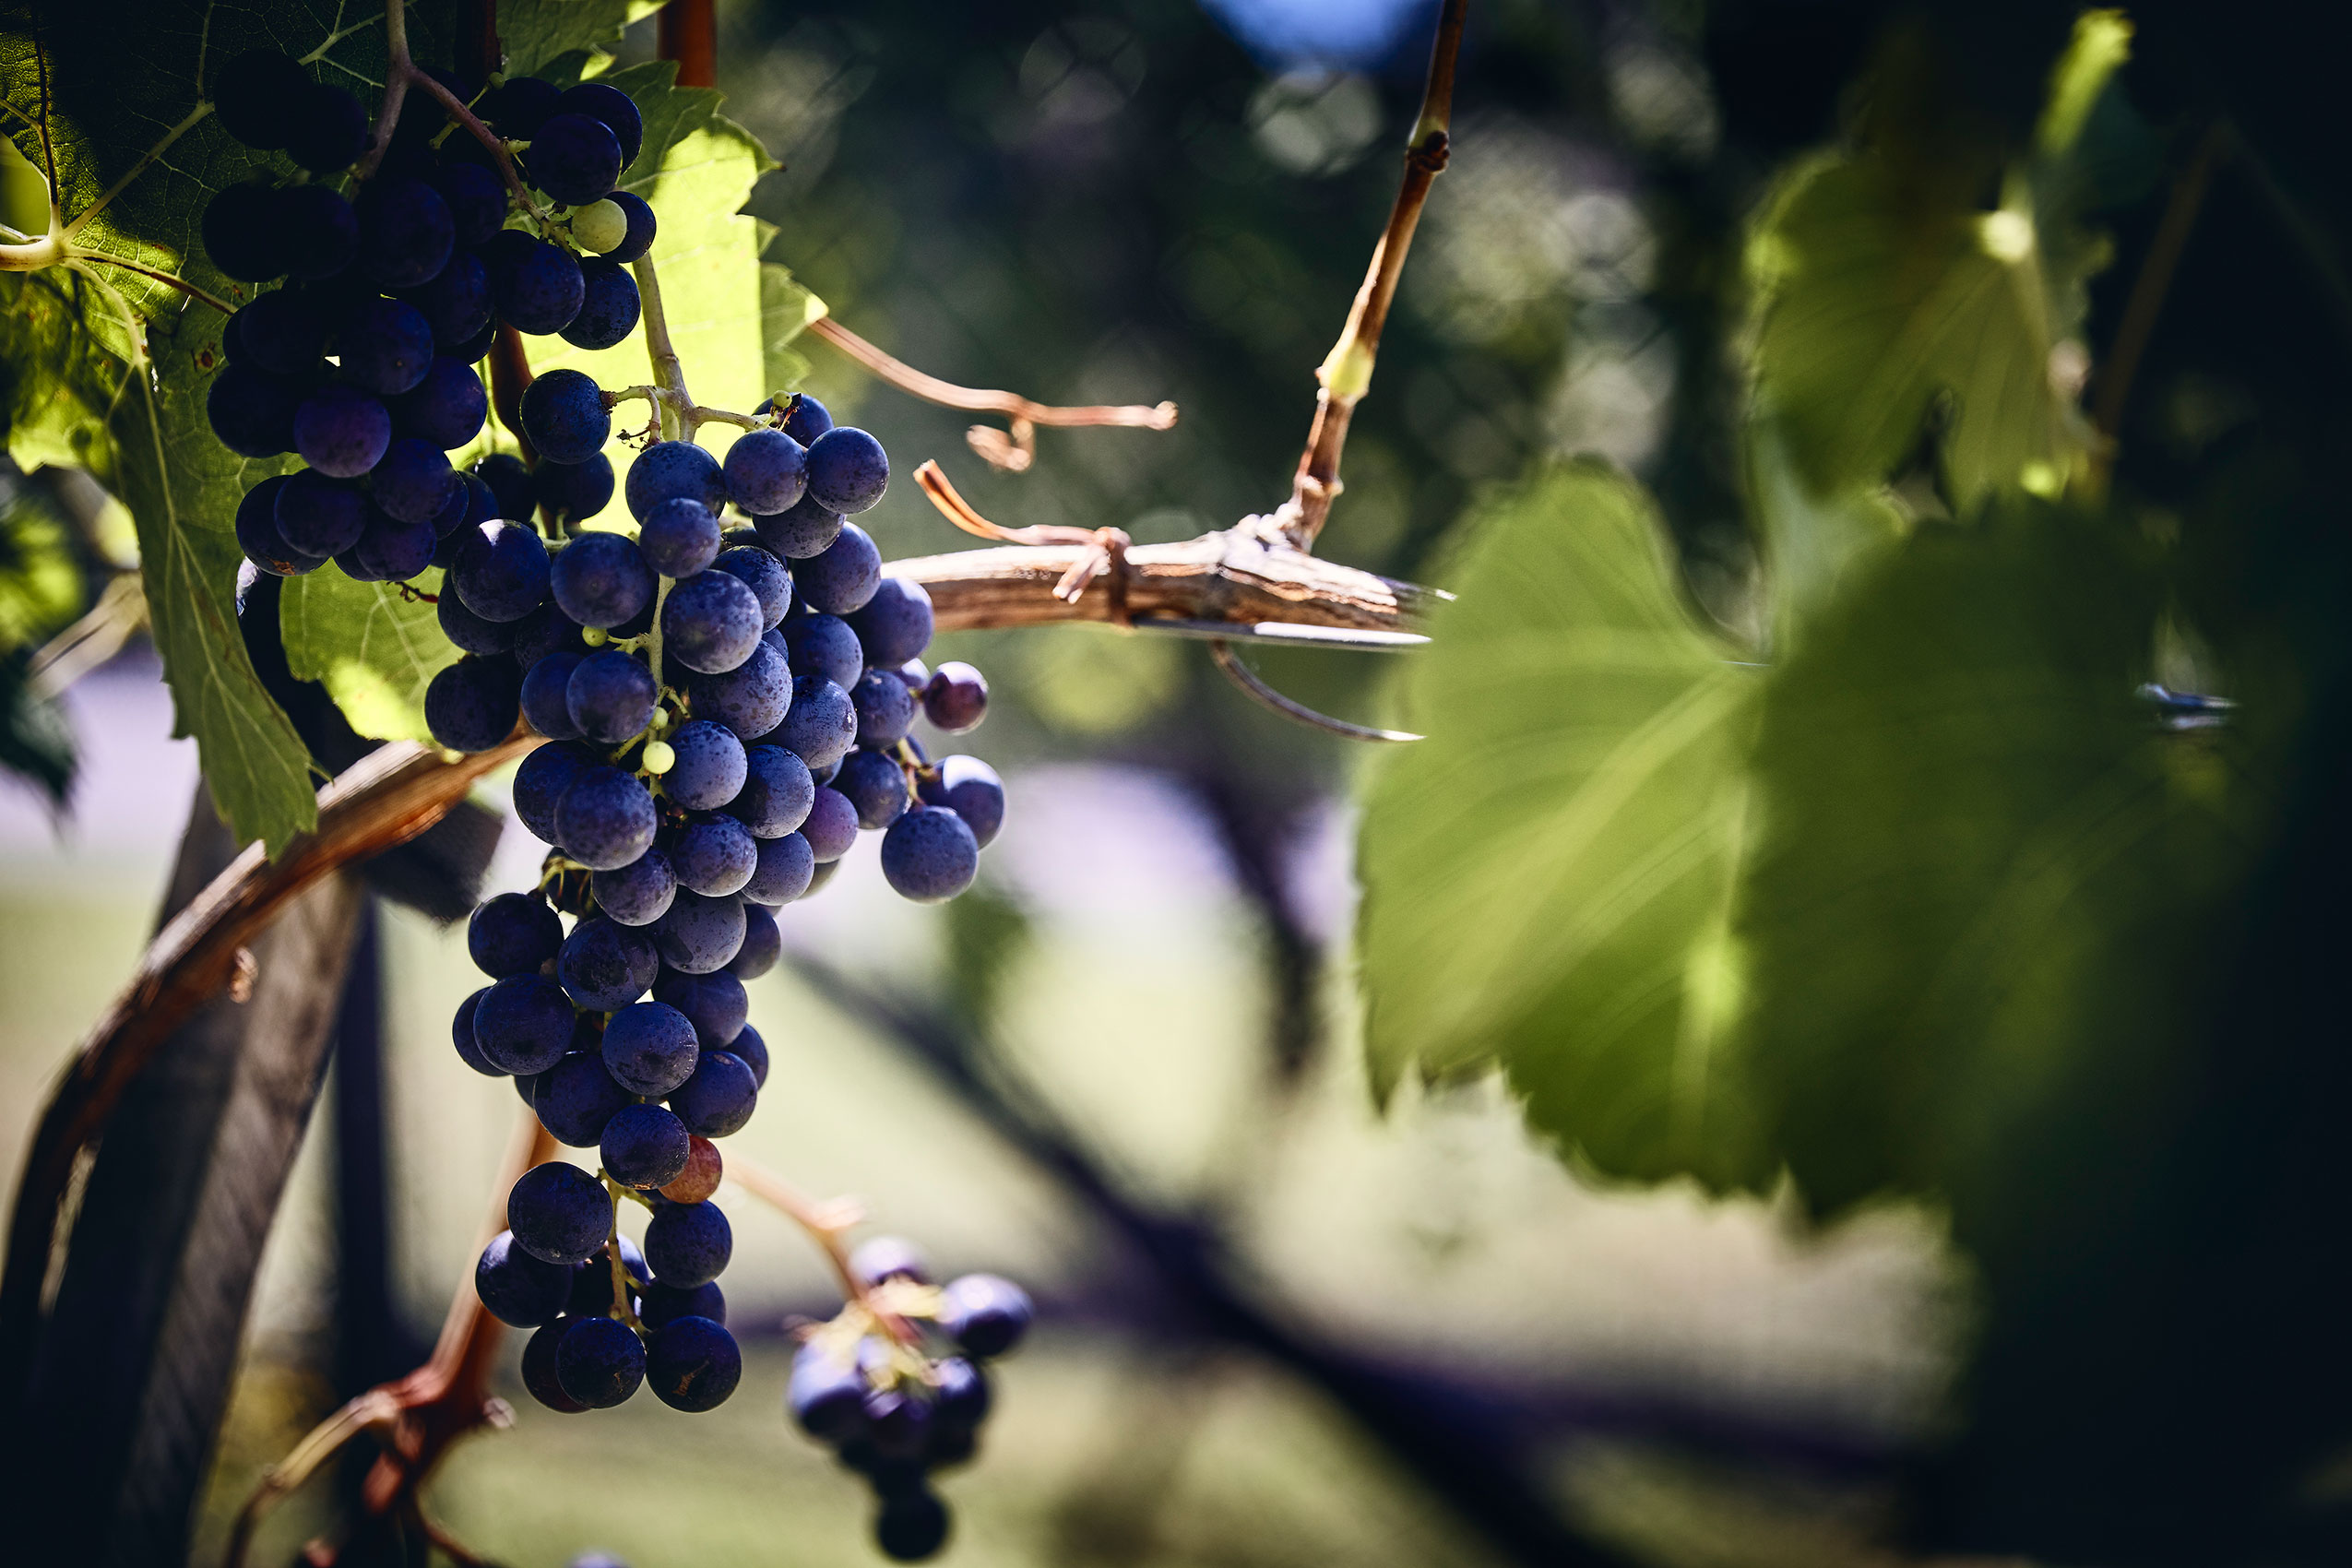 Shared Kitchen • Rich Indigo Grapes Hanging from Vine in Soft Sunlight • Lifestyle & Editorial Food Photography